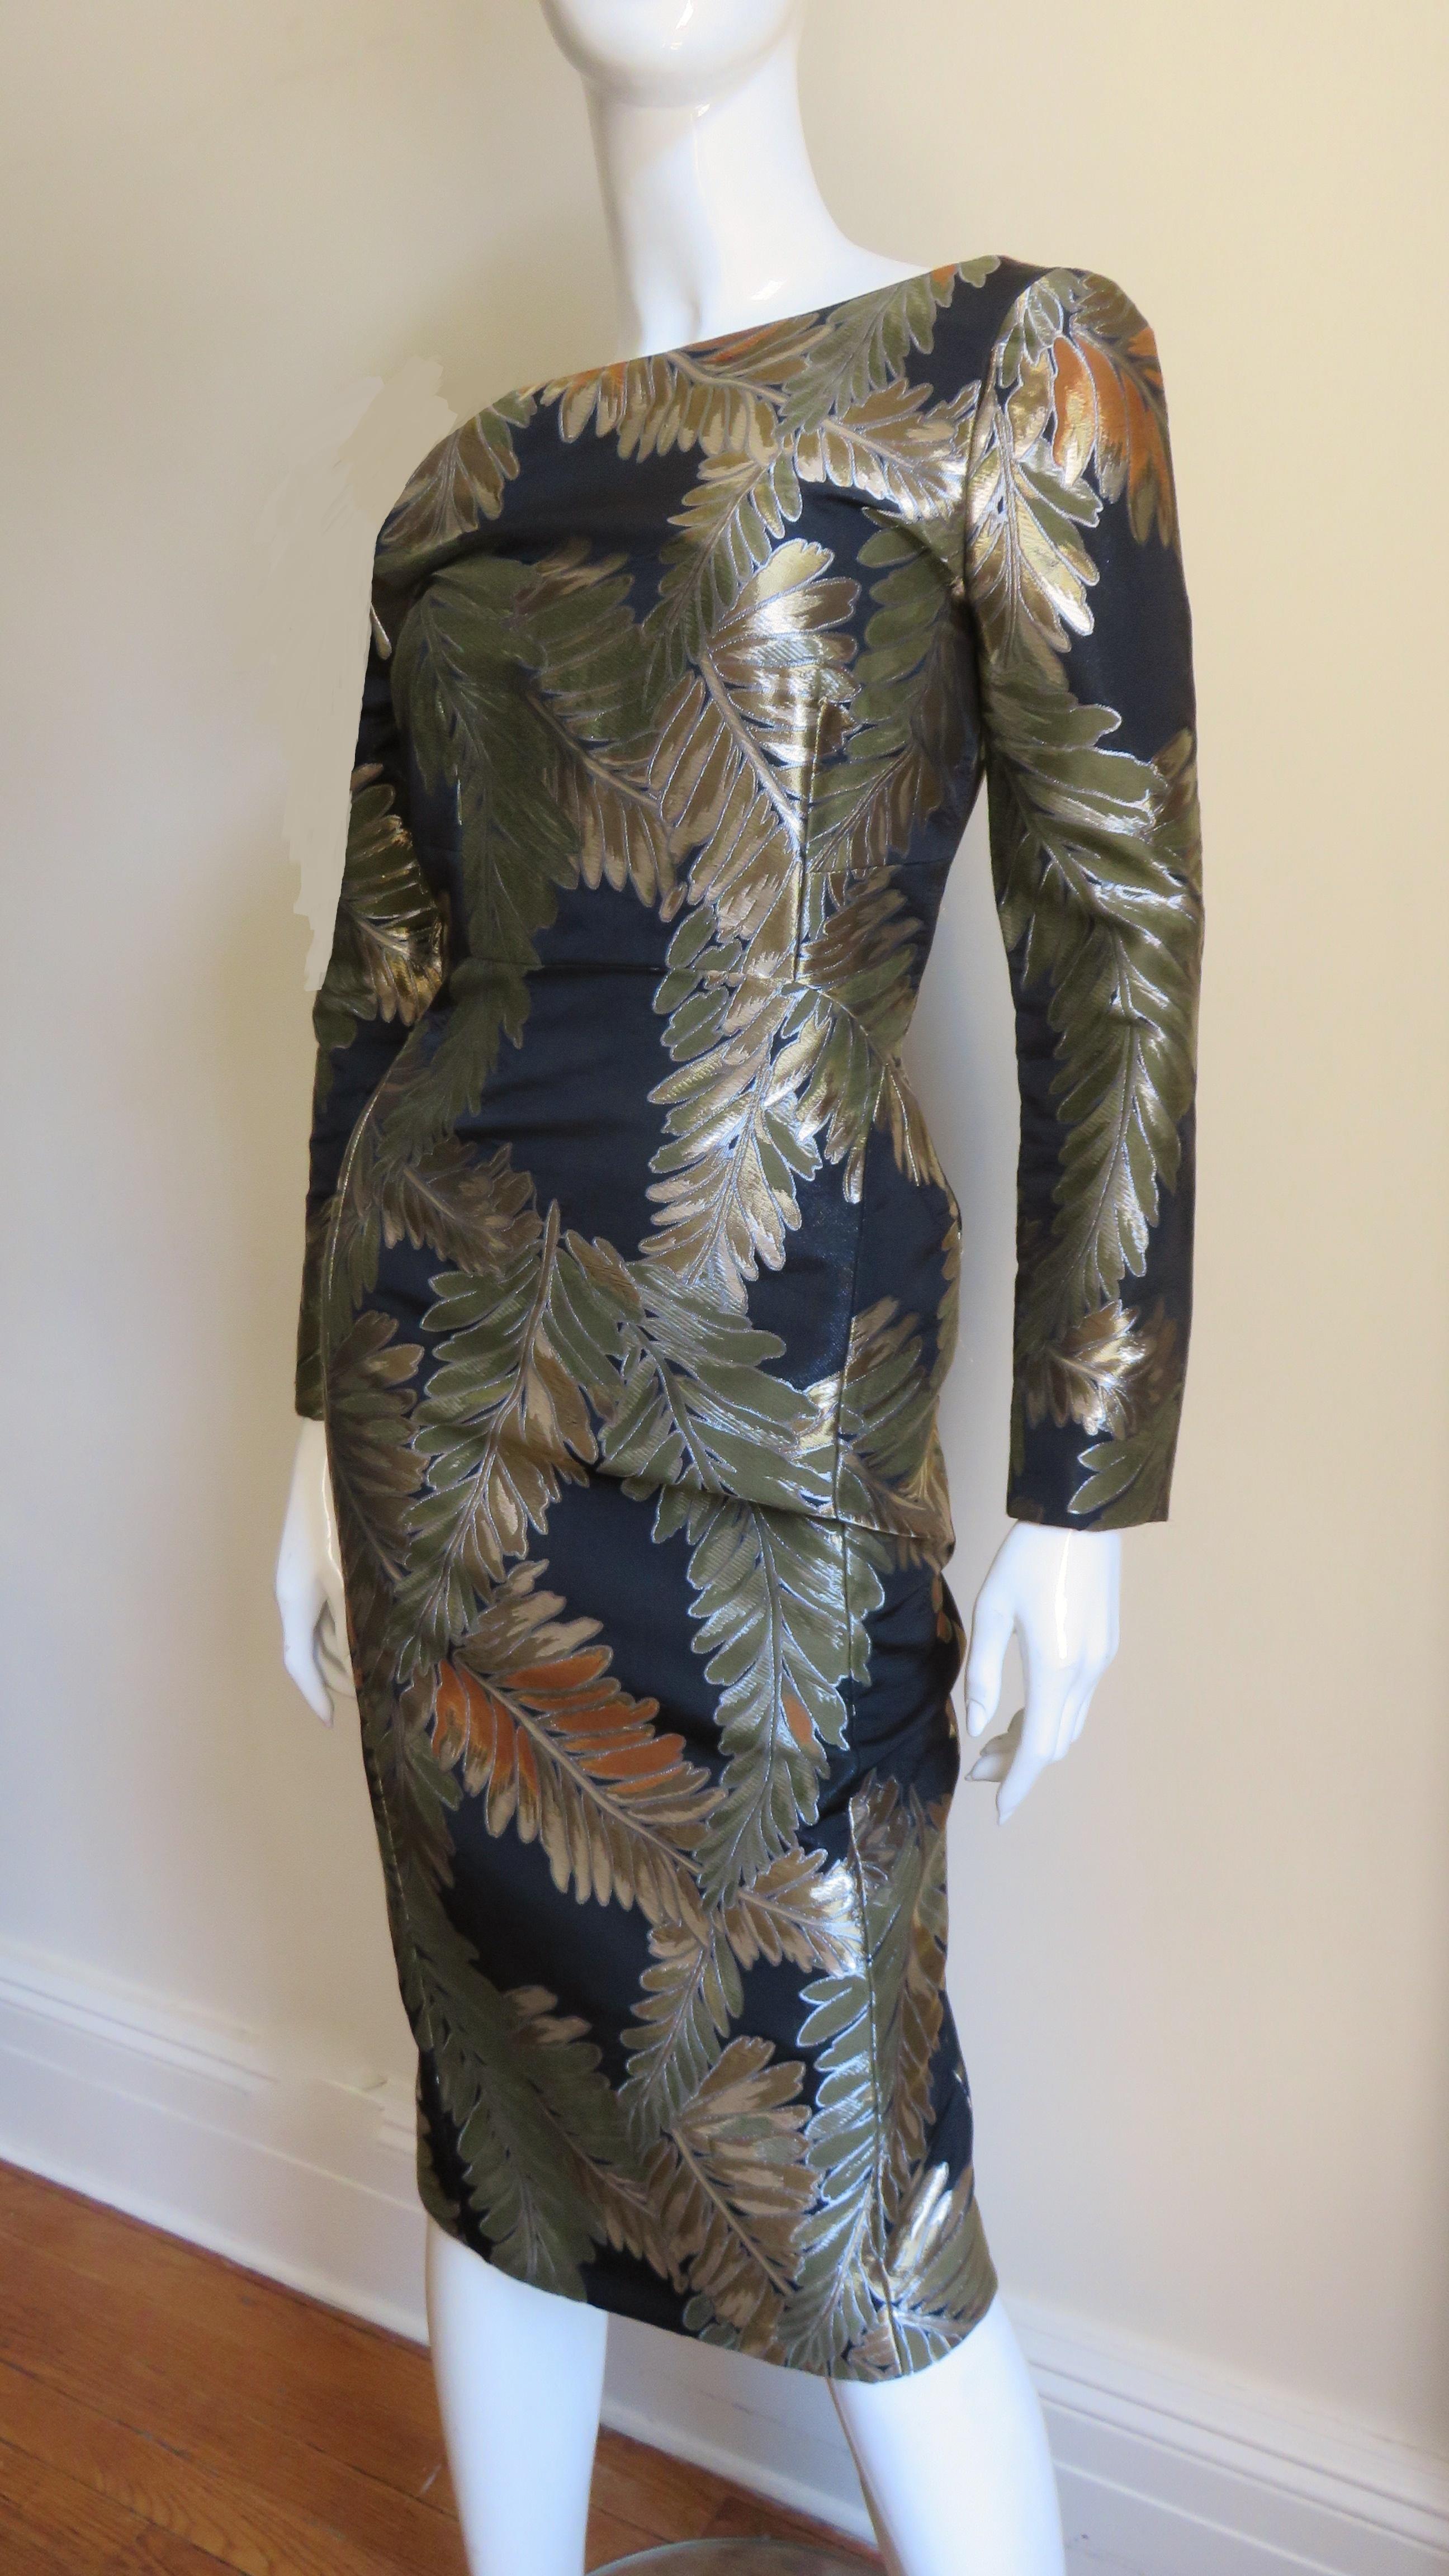 A fabulous silk dress from Gucci in a gold, rust and olive brocade fern pattern on a black background.  It is a semi fitted dress with long zipper cuff sleeves and fabulous flattering curved seaming at the waistline. The V back ends just above the